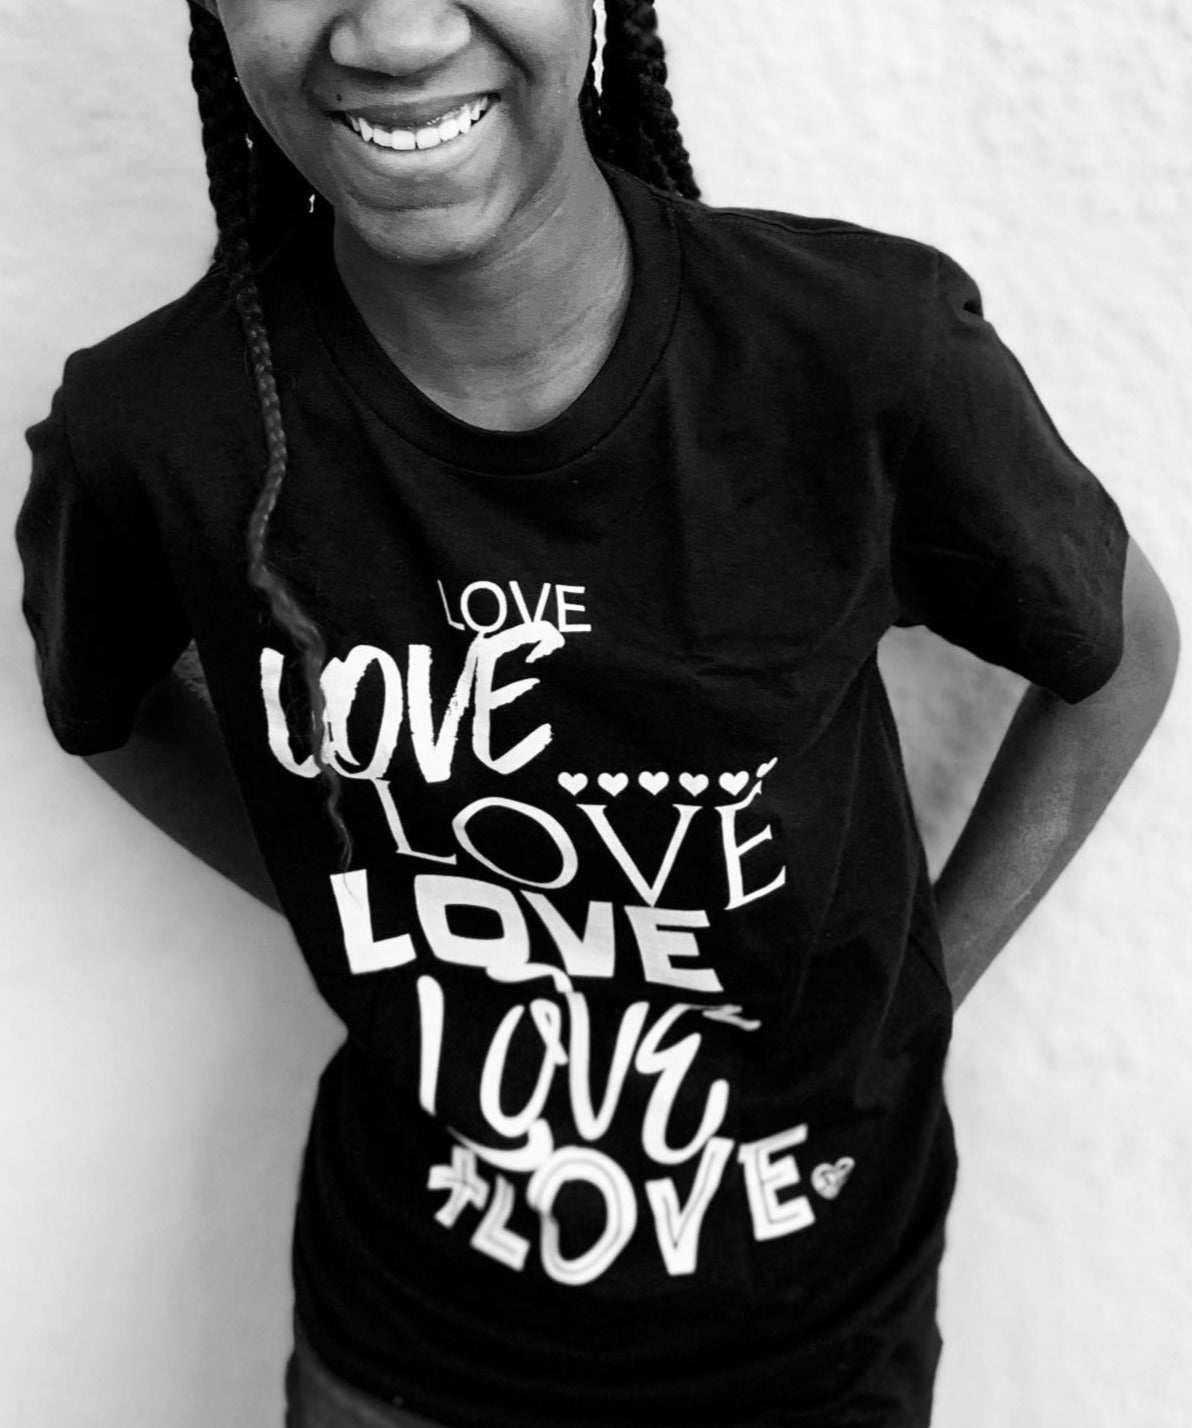 Lots of LOVE Girl's T-Shirt